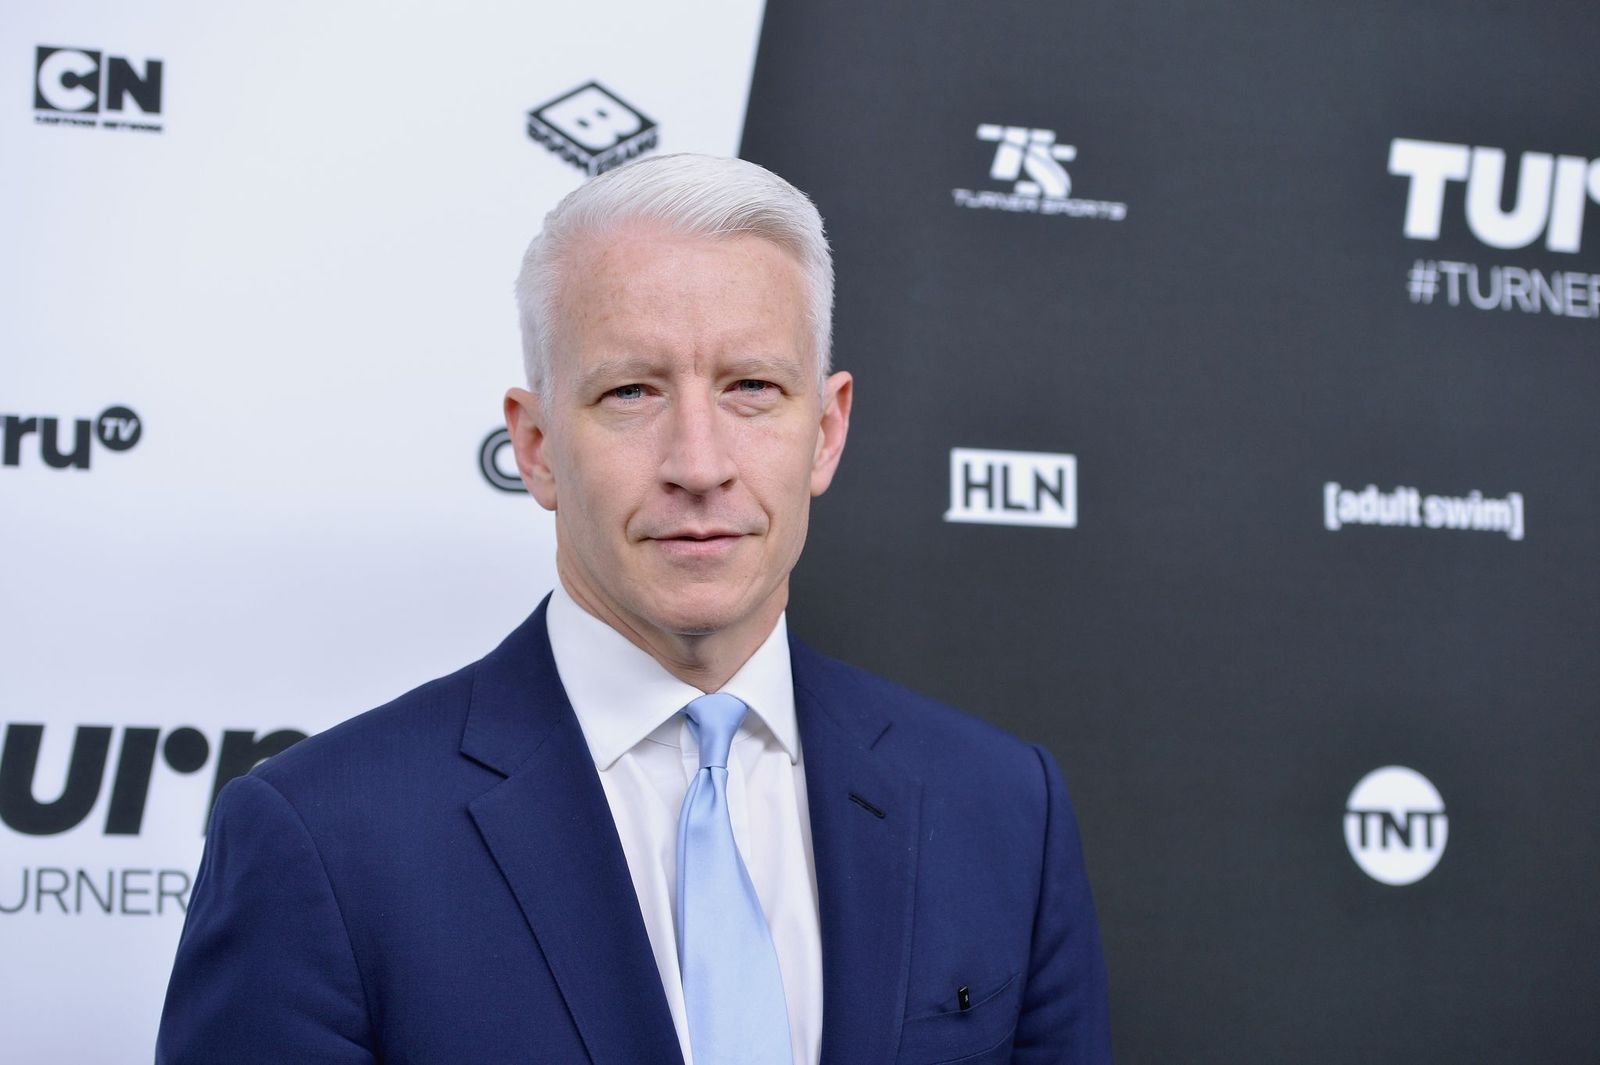 Anderson Cooper at the Turner Upfront on May 18, 2016, in New York City | Photo: Slaven Vlasic/Getty Images